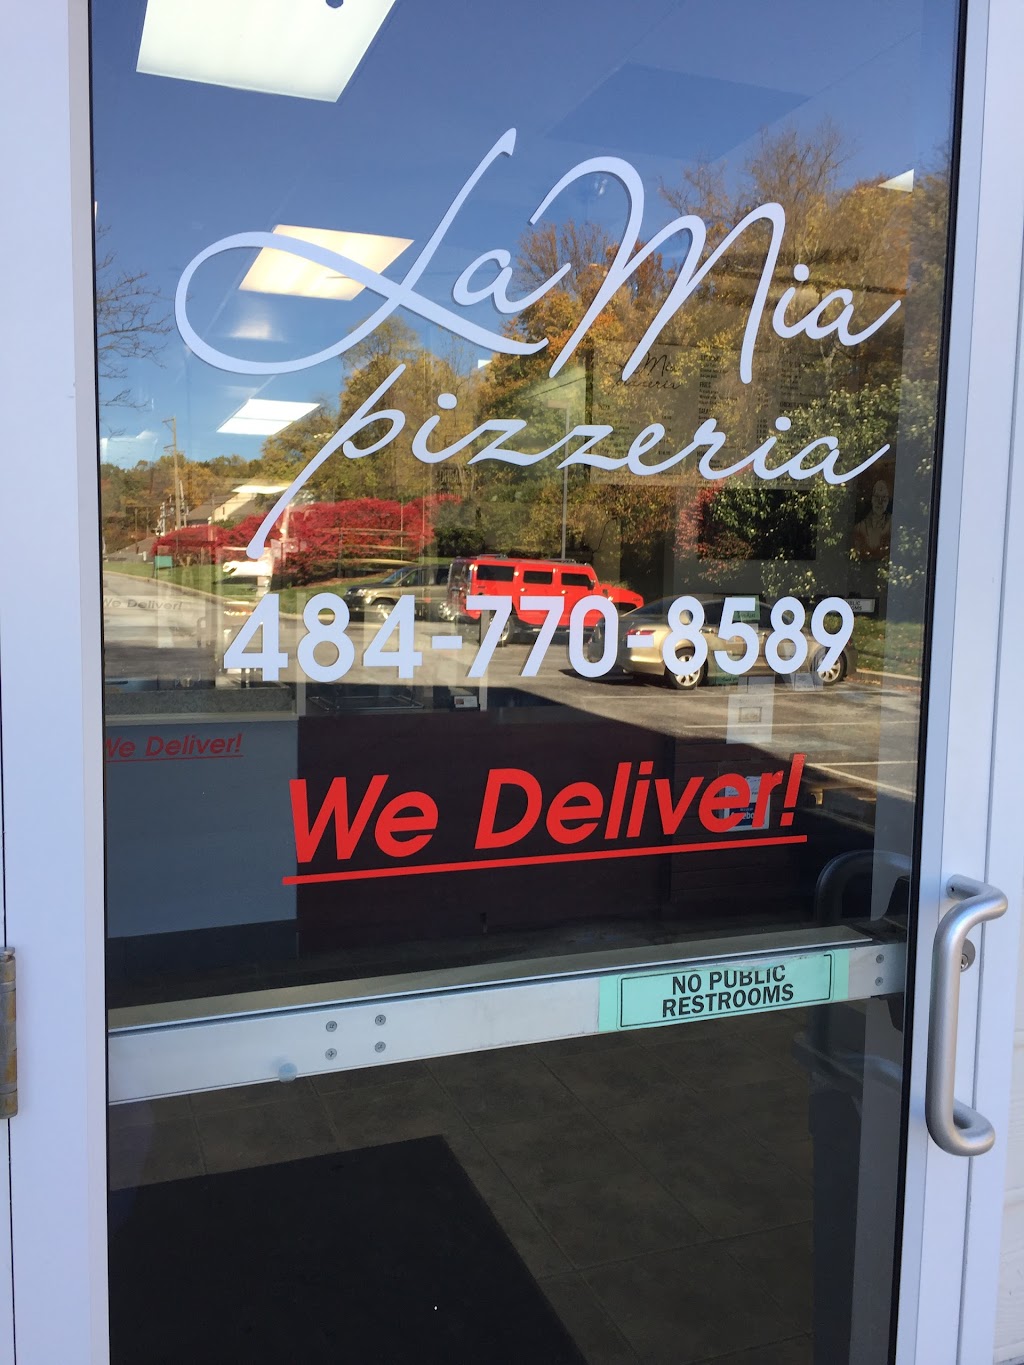 La Mia Pizzeria ( Chadds Ford Pa.) | 330 Kennett Pike #111, Chadds Ford, PA 19317 | Phone: (484) 770-8589